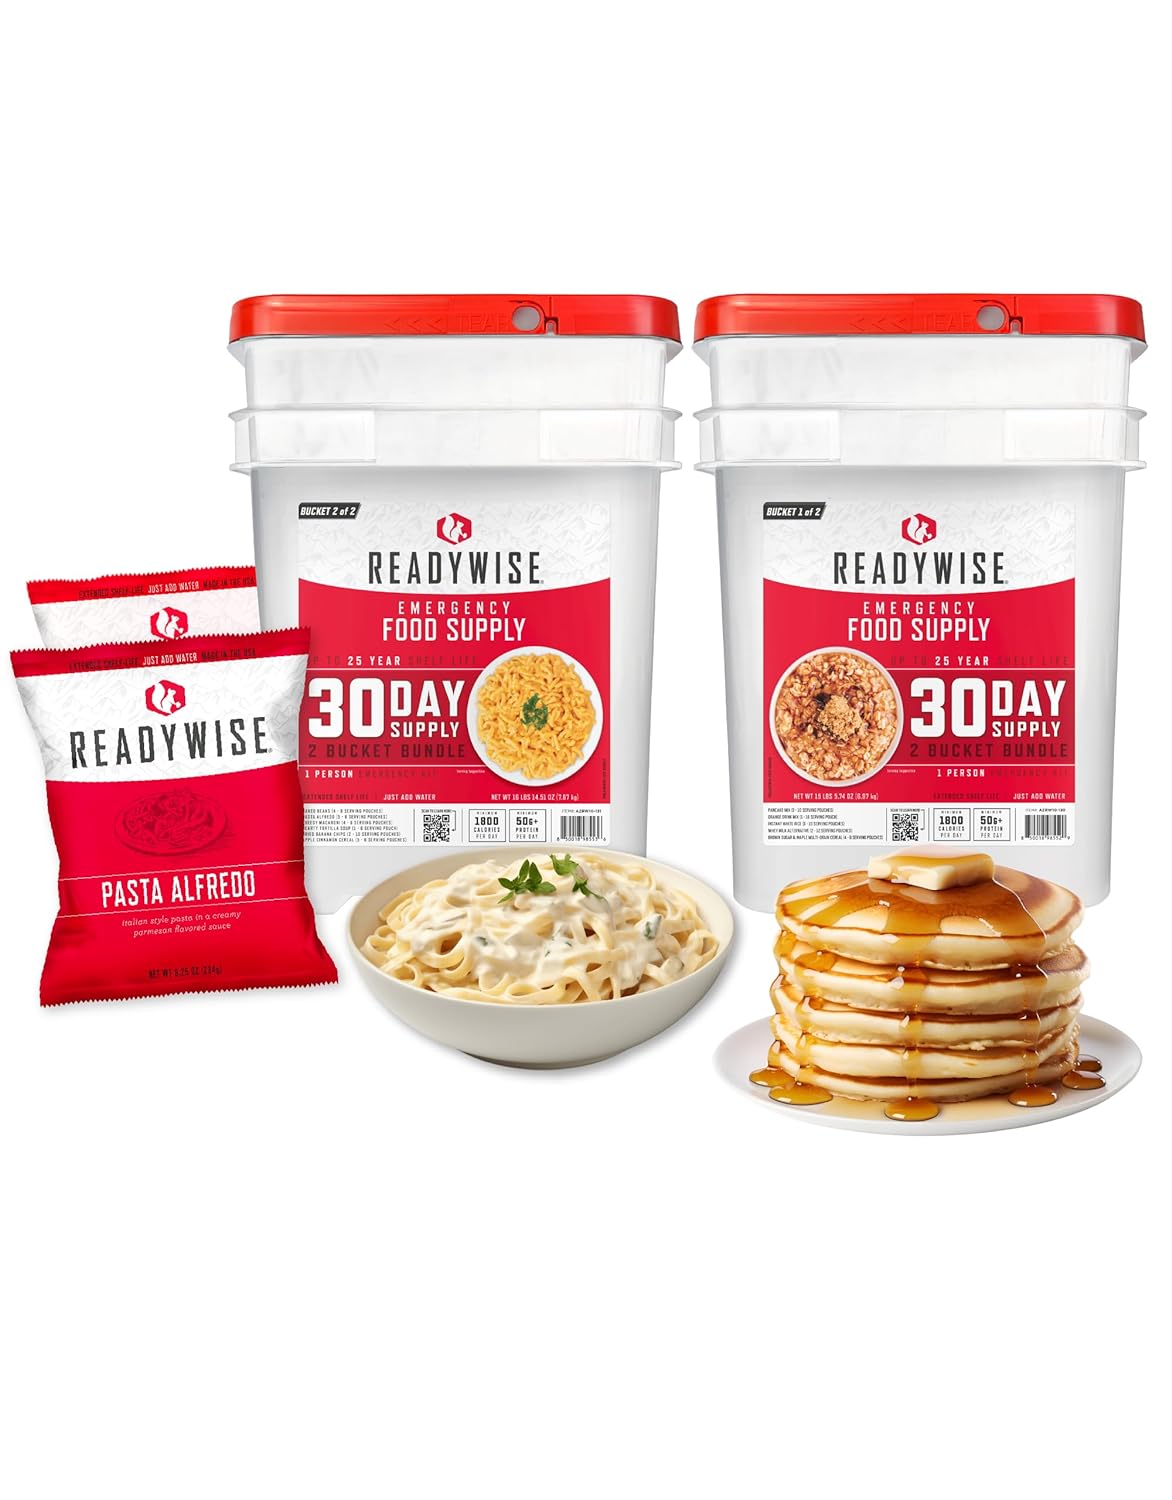 READYWISE - 30 Day, Emergency Food Supply, 298 Servings, 2 Buckets, Freeze-Dried, MRE, Camping, Hiking, Survival, Adventure Meal, 25-Year Shelf Life